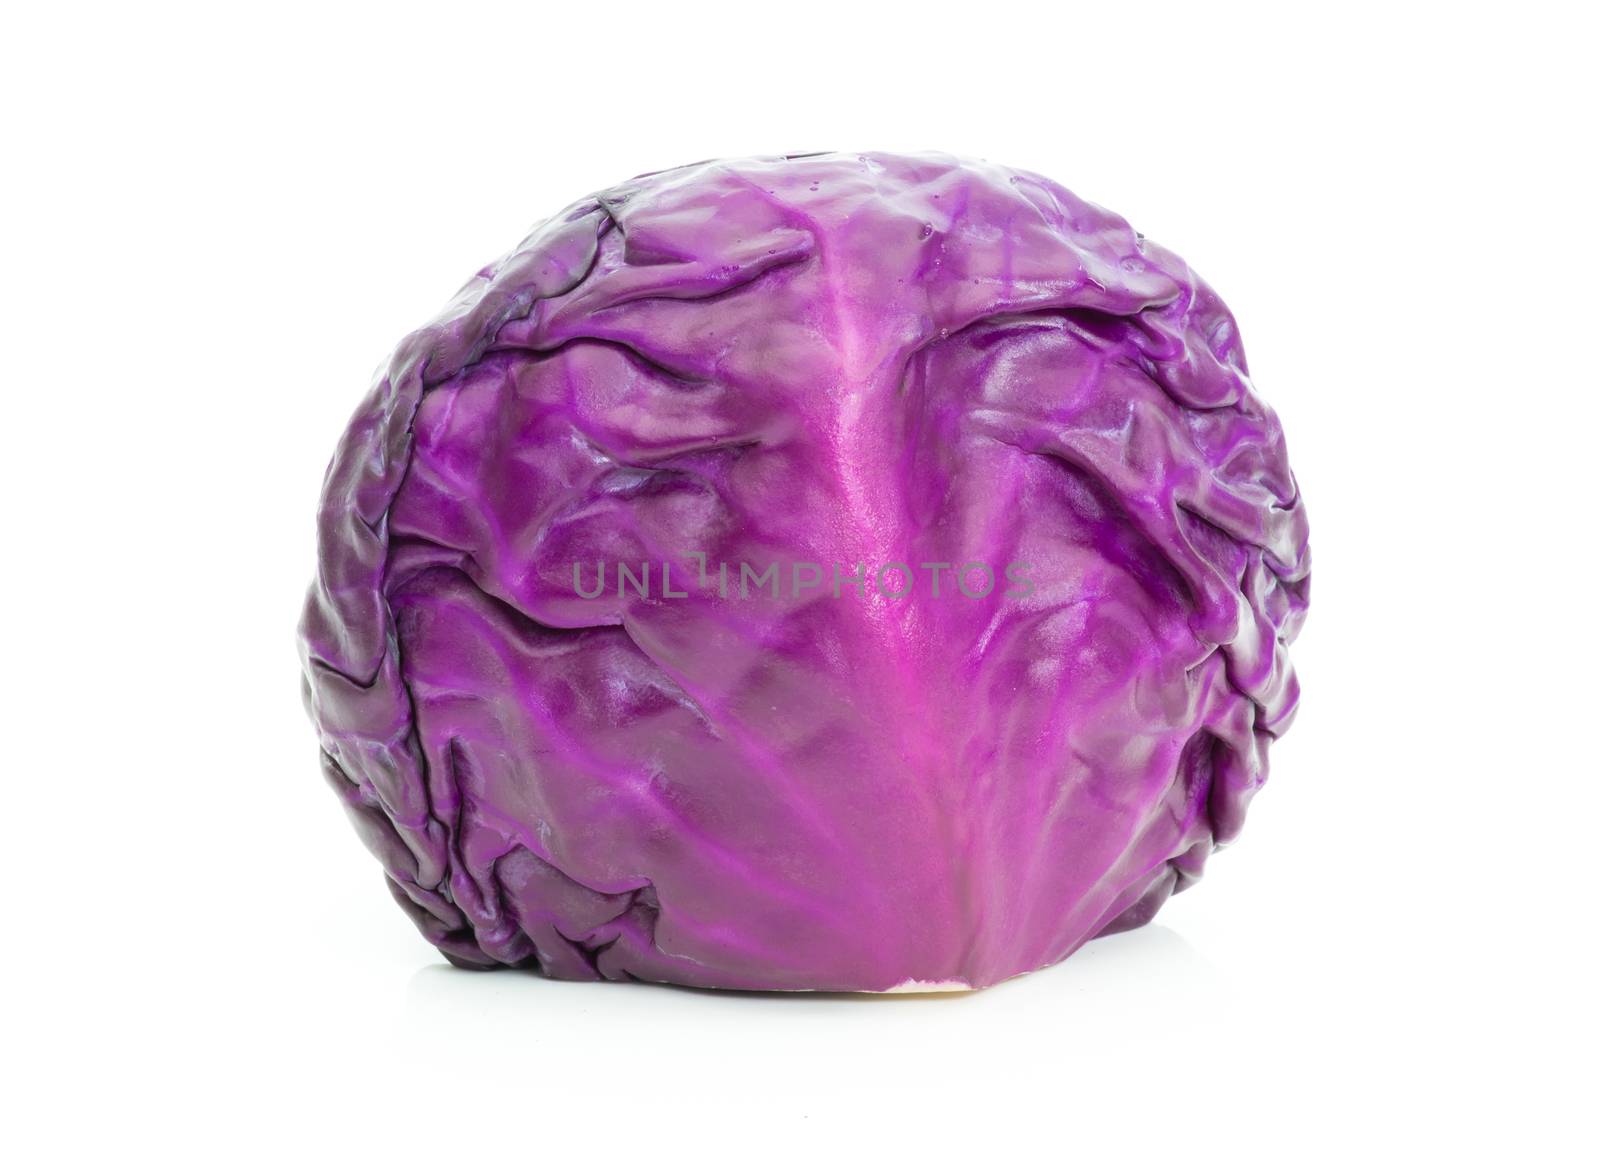 Red cabbage on a white background by sompongtom